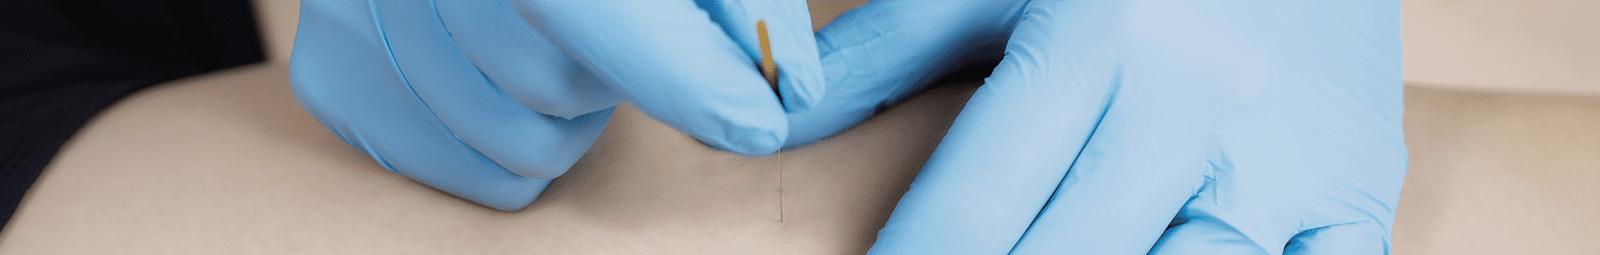 Image of physiotherapist using dry needling technique on patient